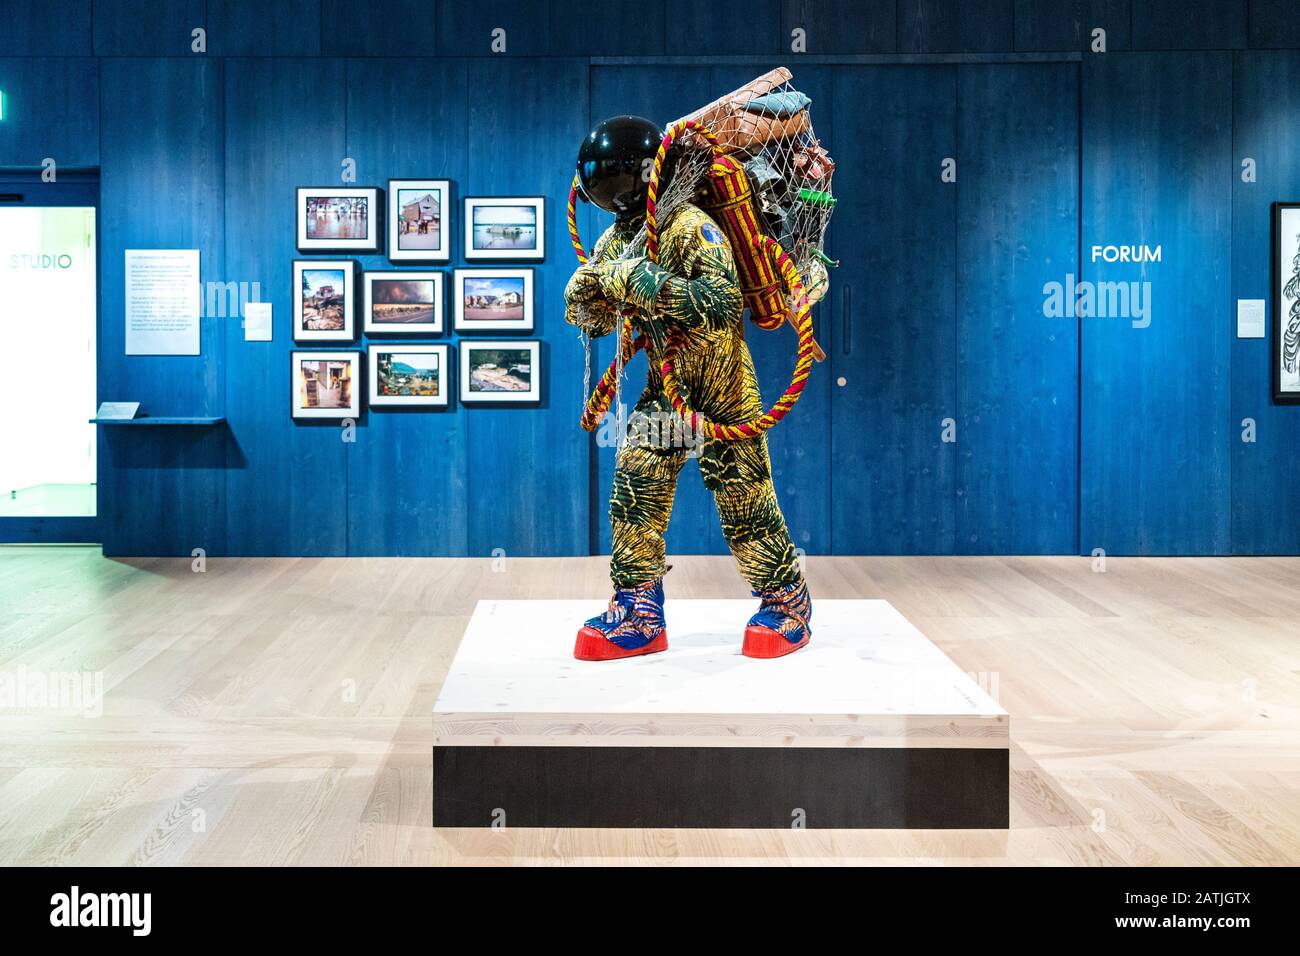 Display exhibits at the permanent exhibition Being Human at the Wellcome Collection including Yinka Shonibare’s ‘Refugee Astronaut’, London, UK Stock Photo